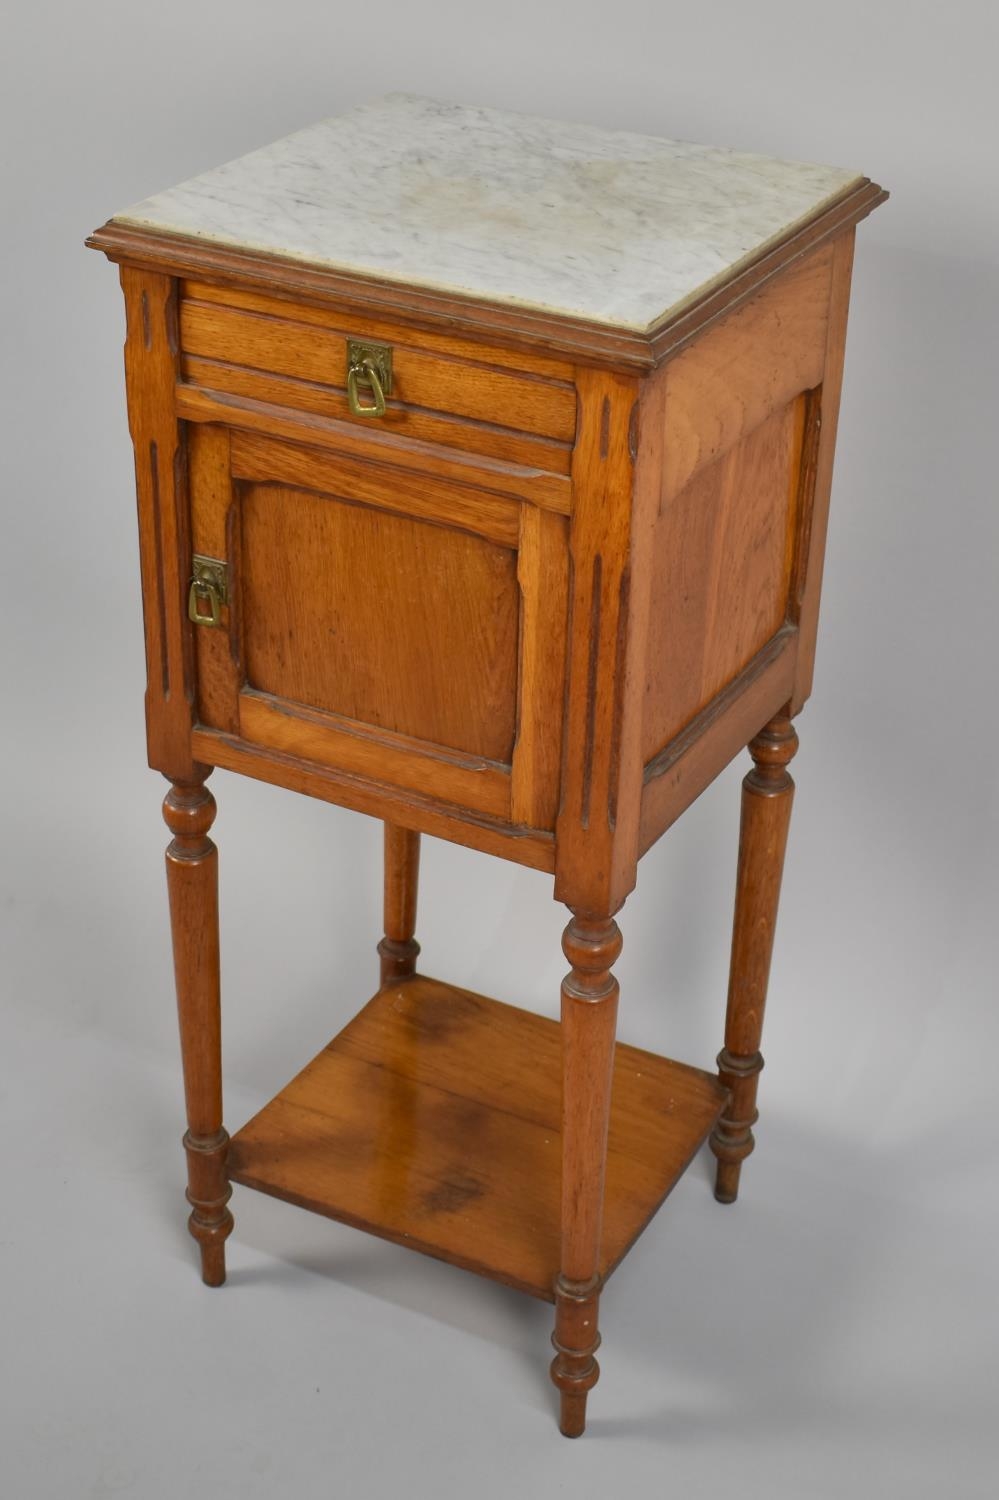 A Late 19th Century Continental Oak Arts and Crafts Style Pot Cupboard with Inset Marble Top over